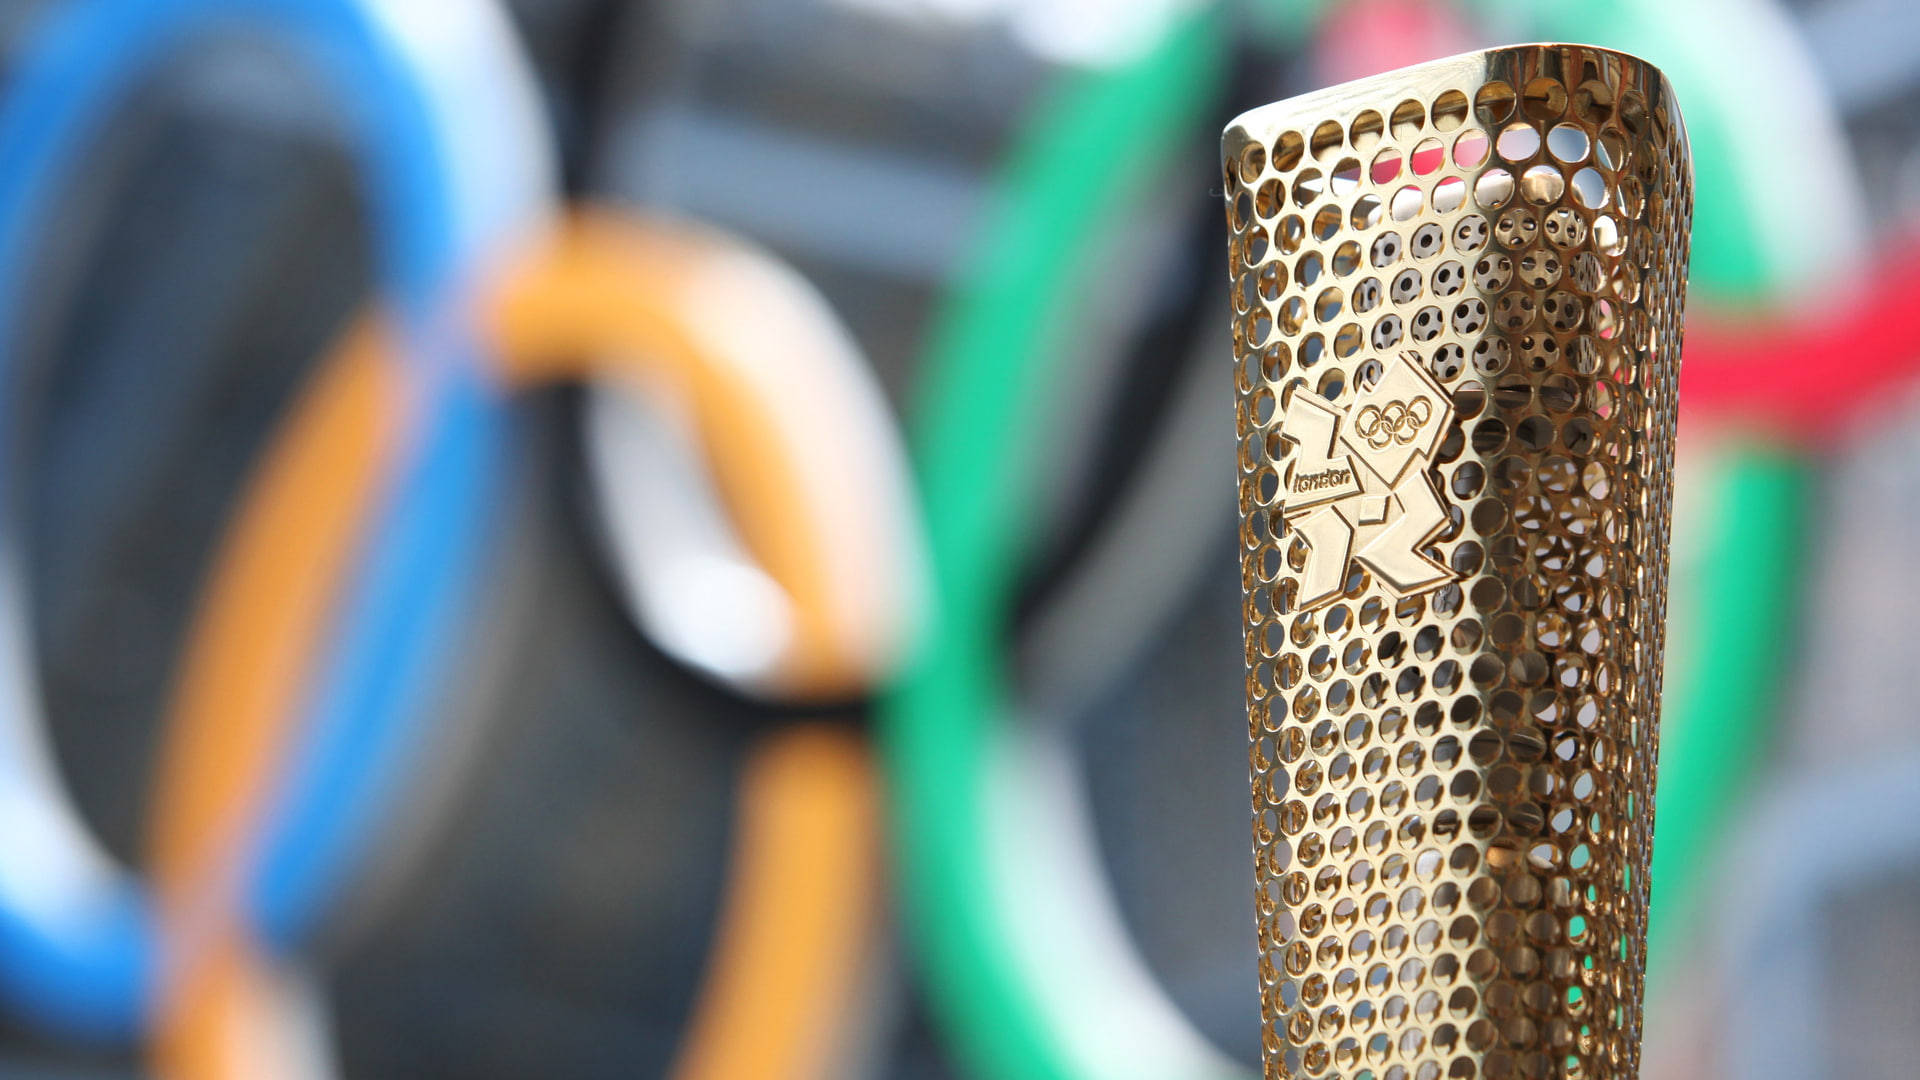 Brightly Blazing: A Close Up Look At The 2020 Tokyo Olympics Torch